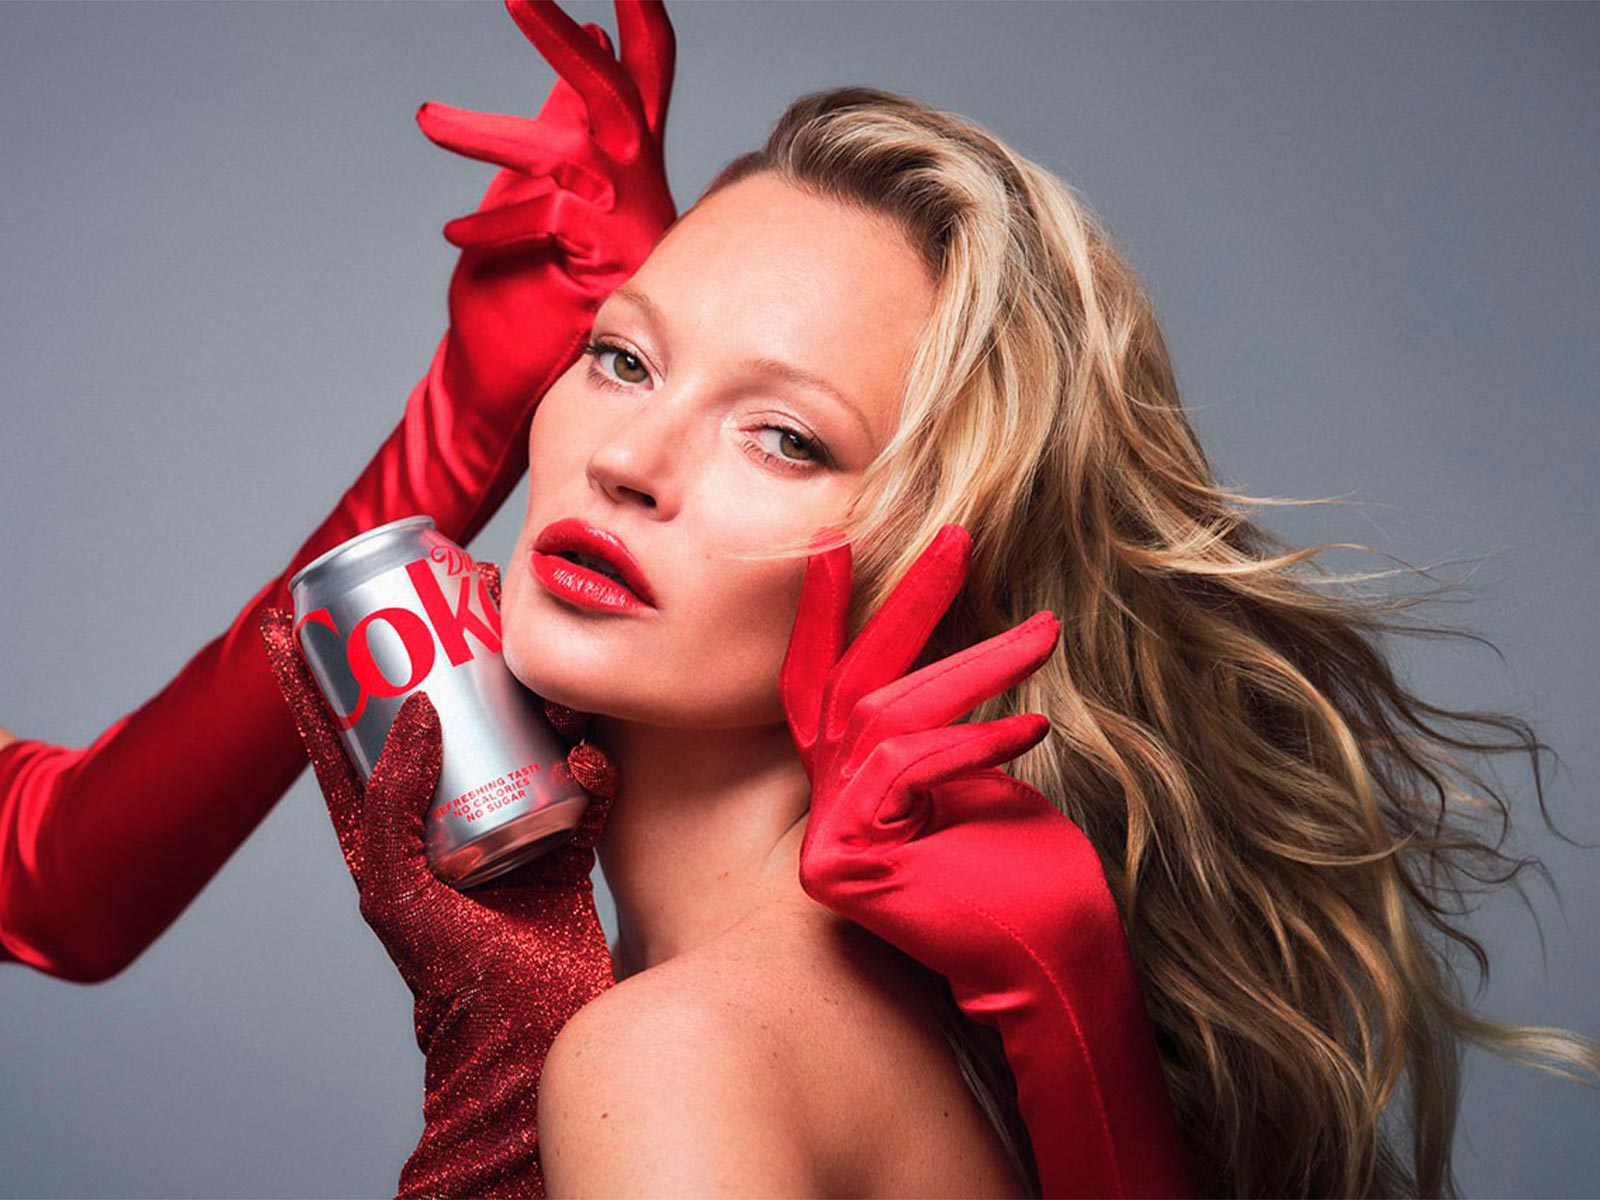 Kate Moss is the new creative director of Diet Coke